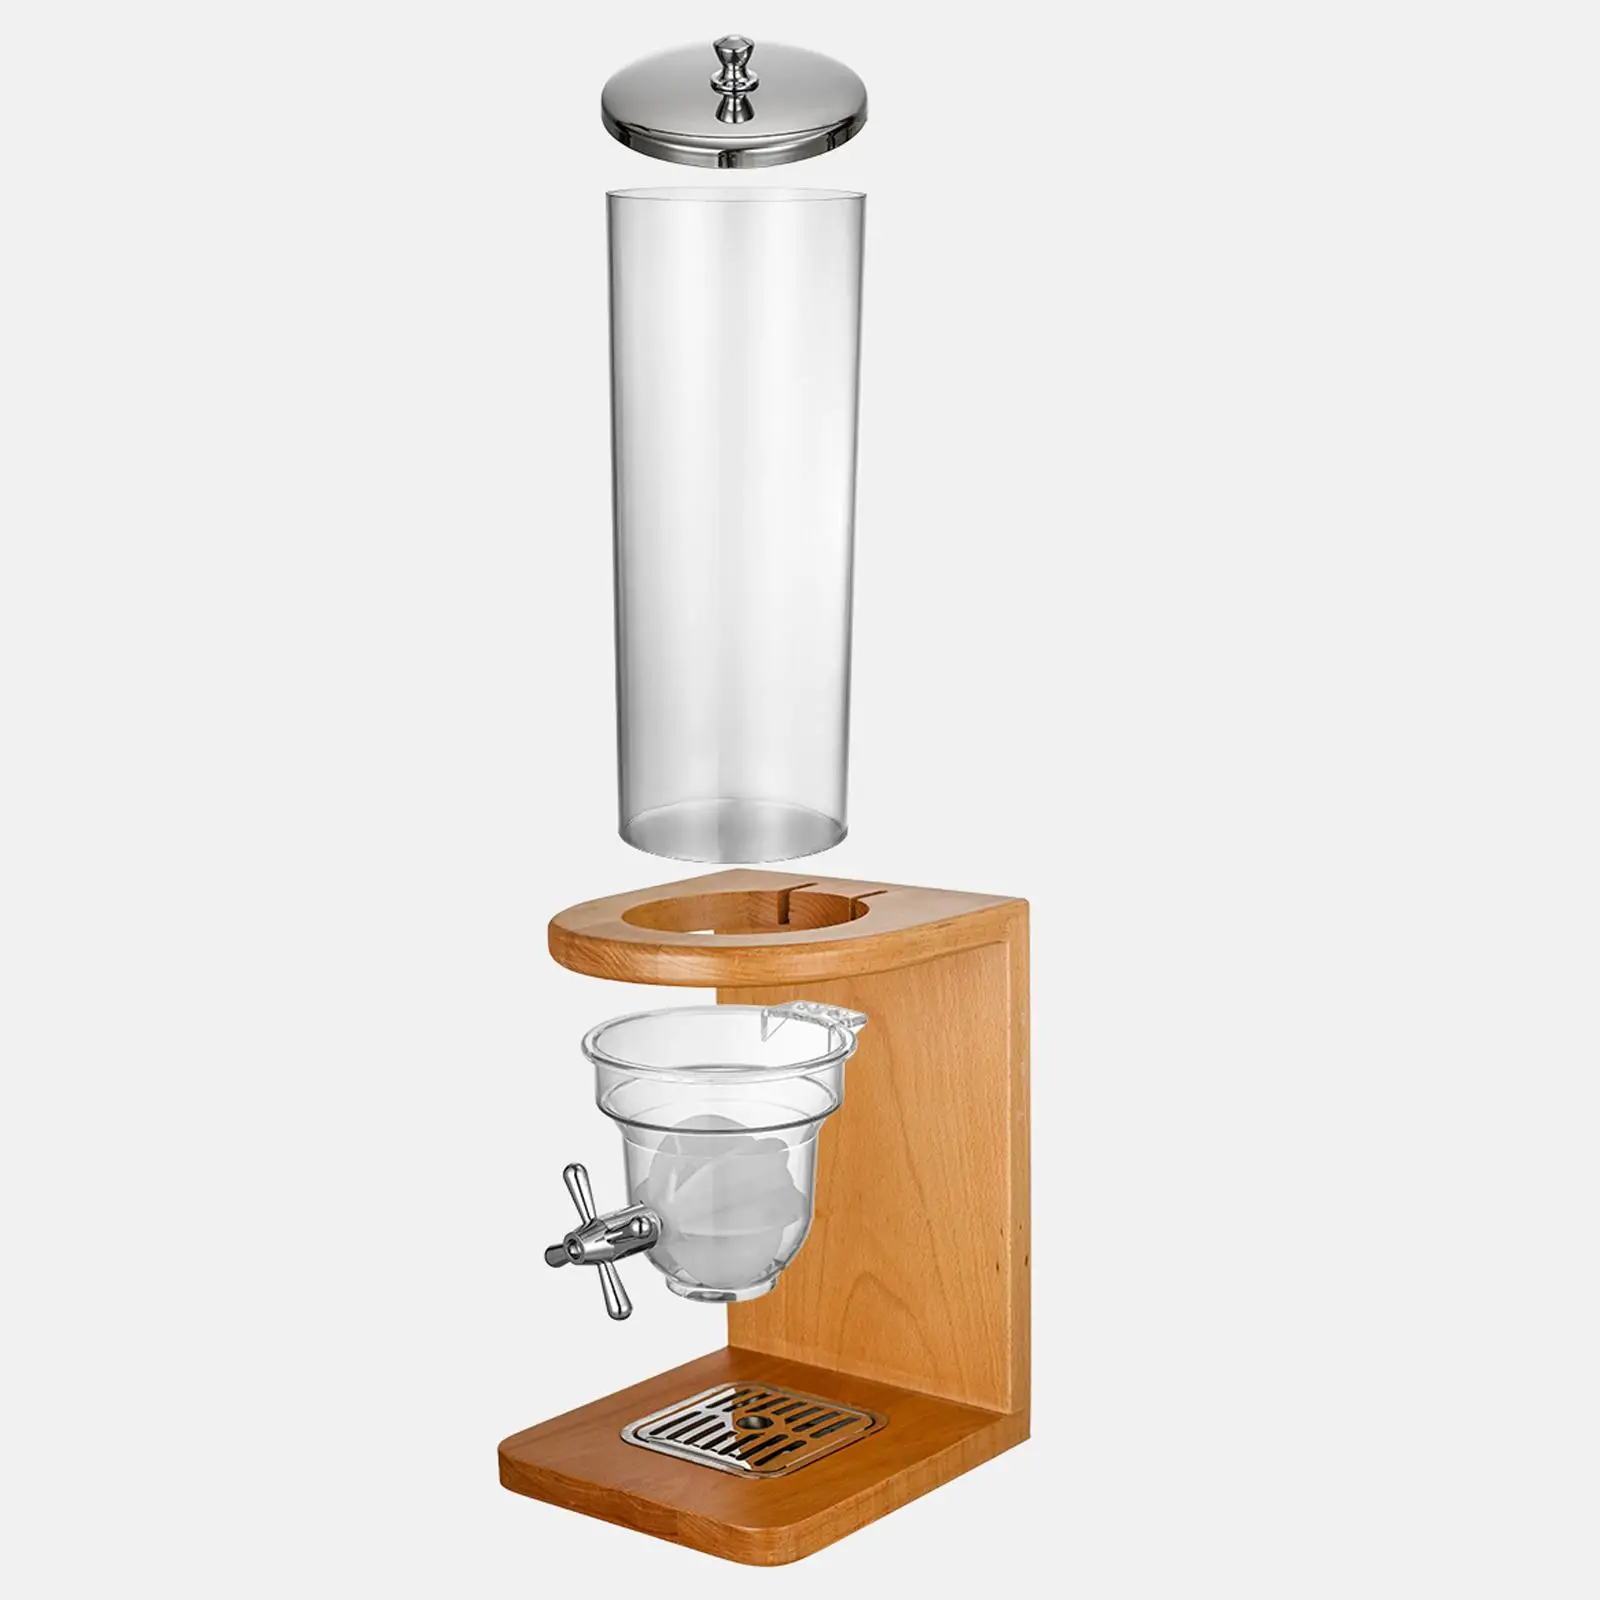 Dry Food Dispenser Convenient Rotary Switch Refillable Wood Base Shatterproof Disassemble Cereal Dispenser for Kitchen Household